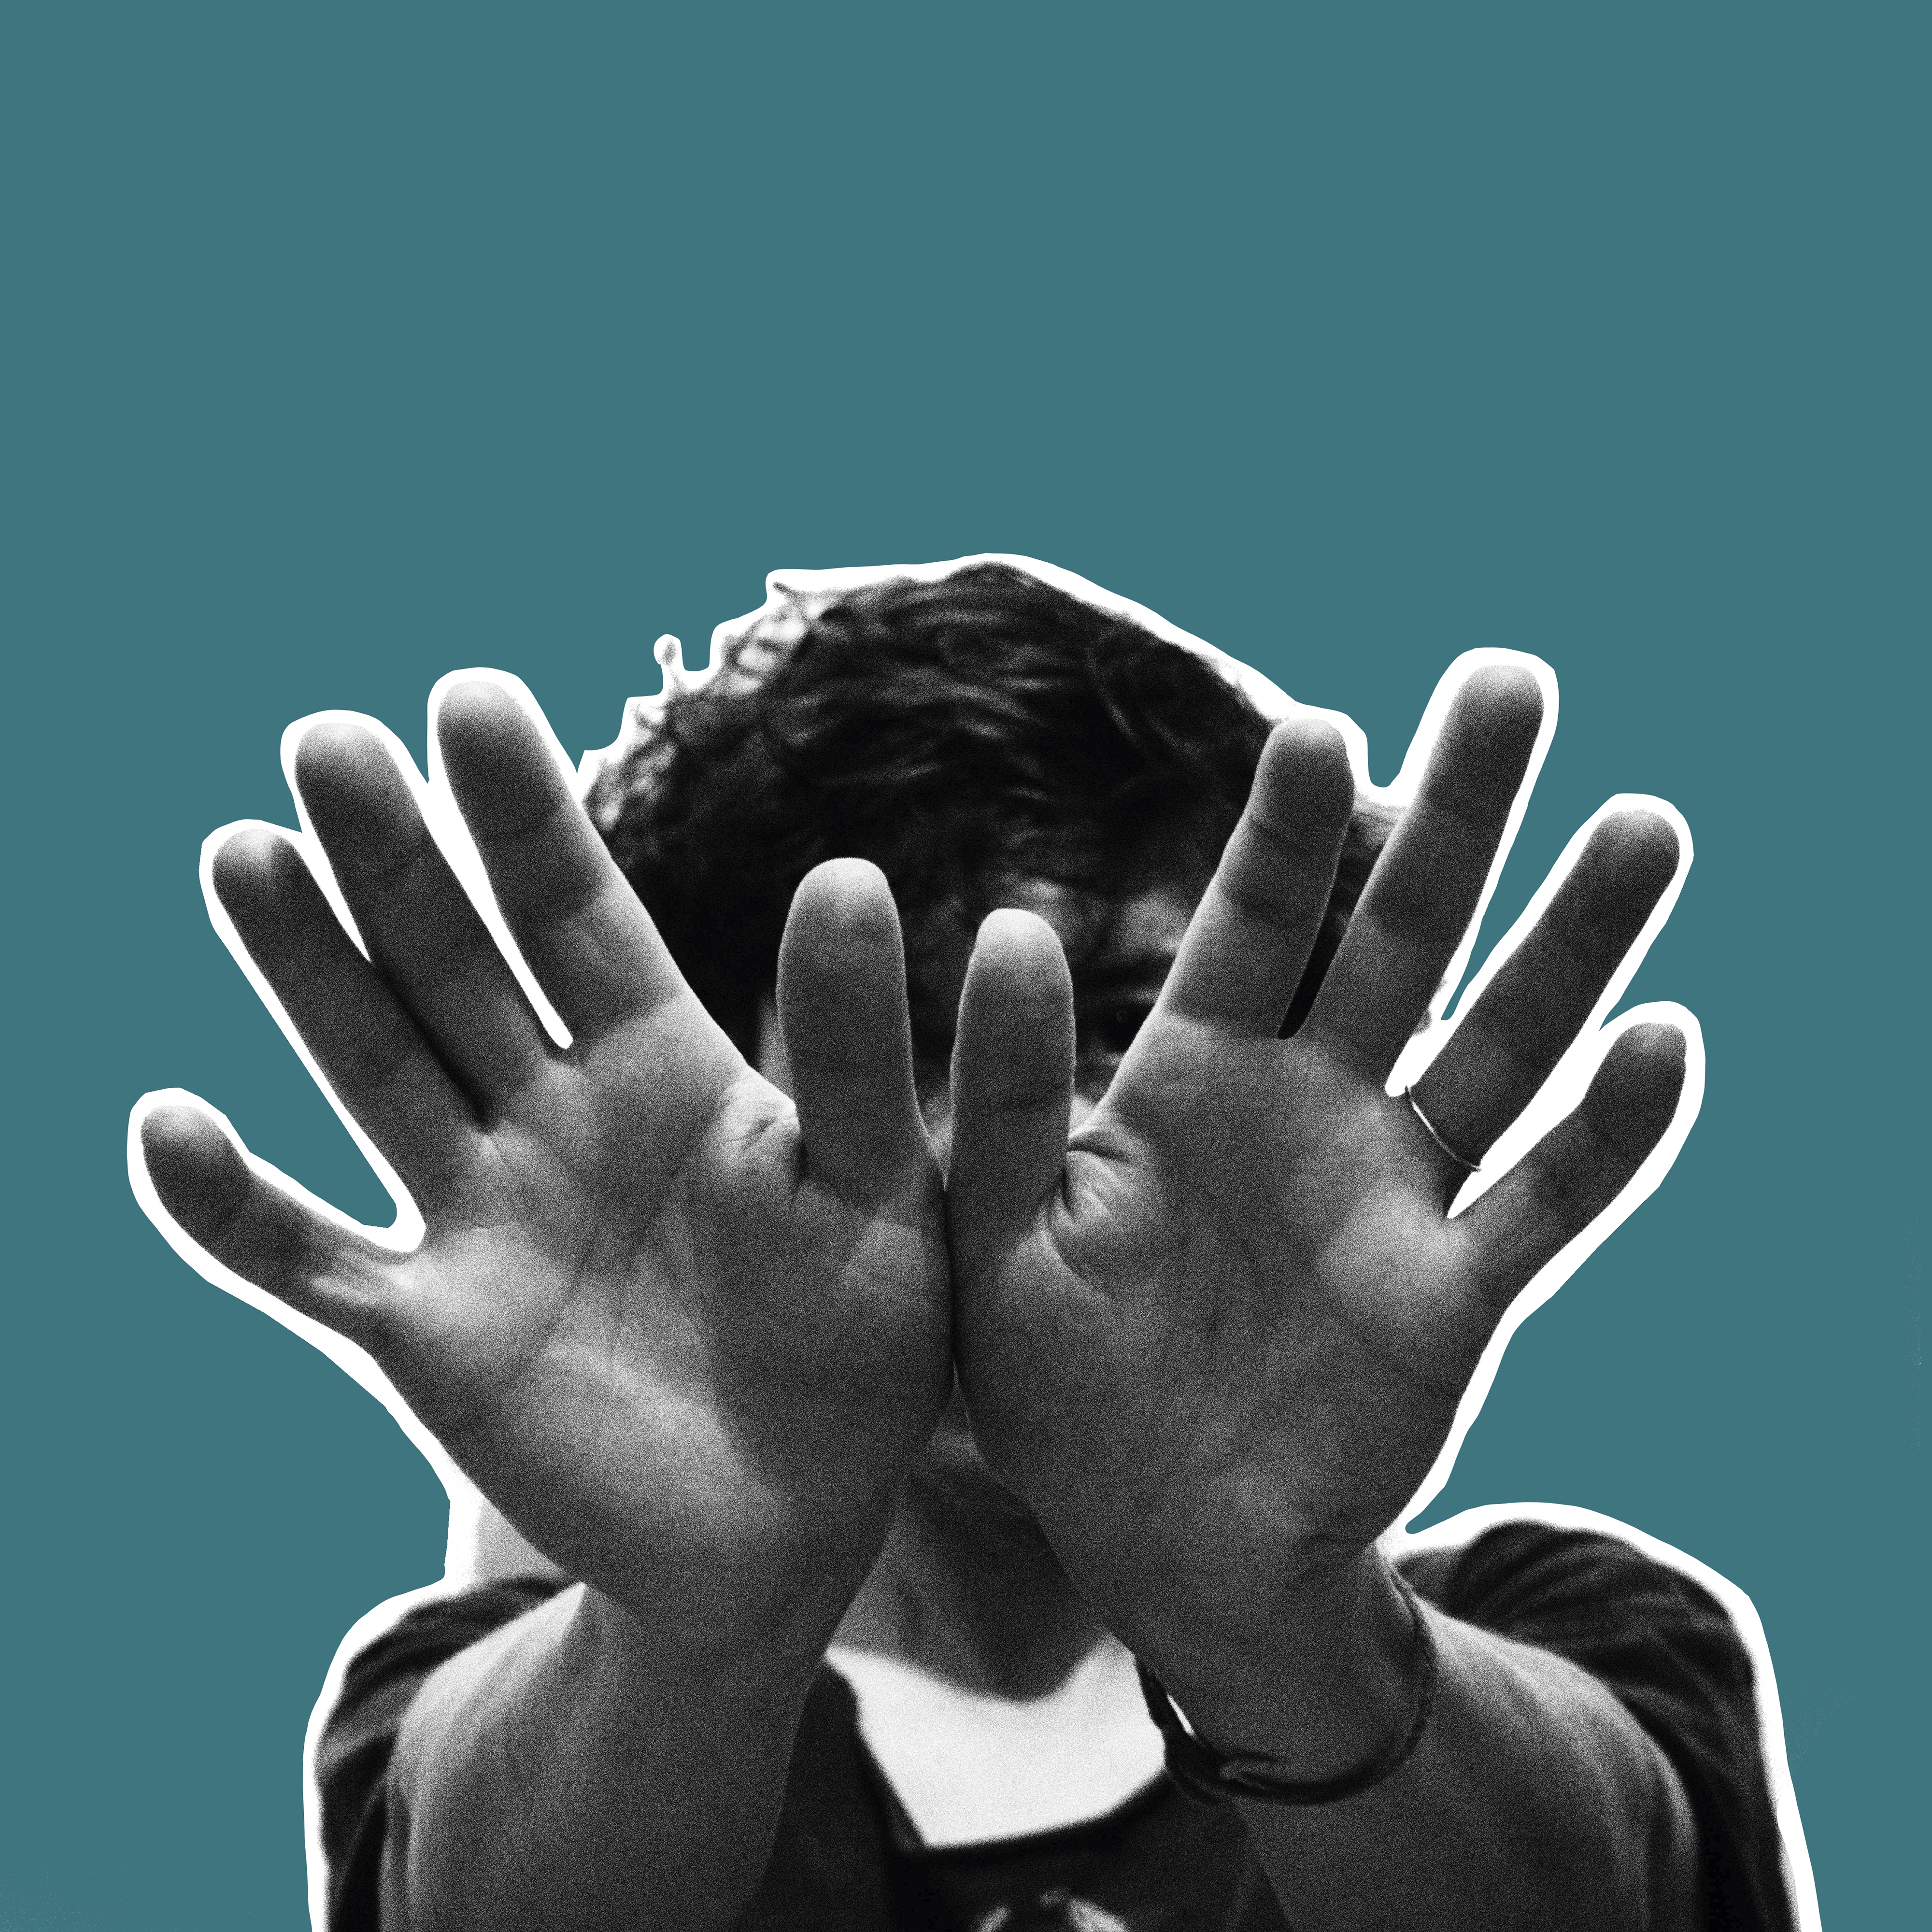 Tune-Yards will release their new album I can feel you creep into my private life on January 19th, via 4AD.